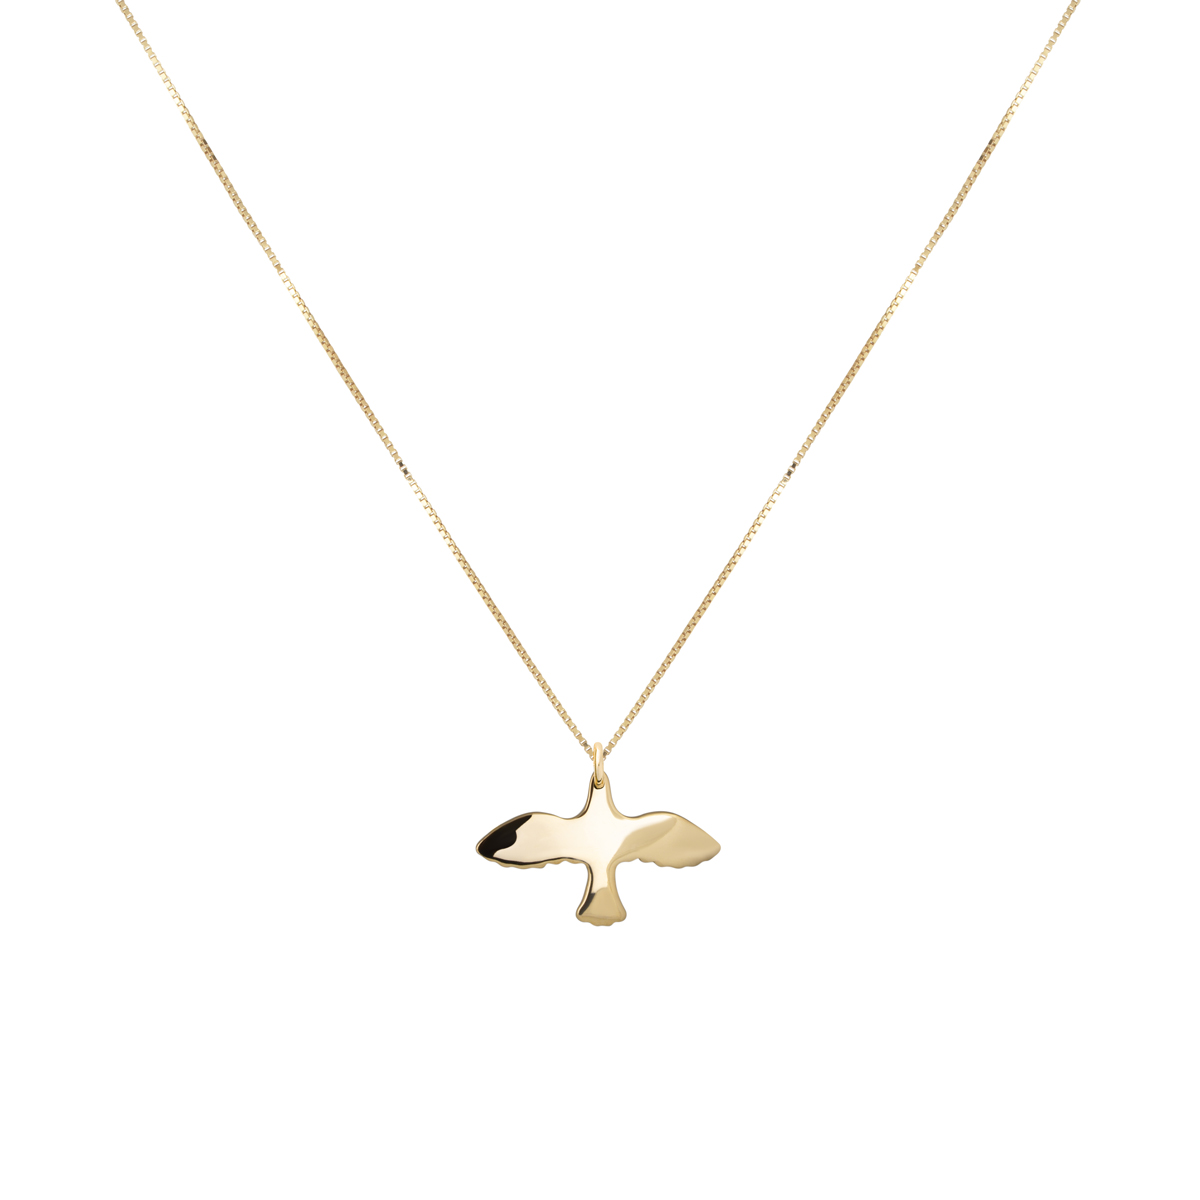 Emma Israelsson GOLDEN SMALL DOVE NECKLACE